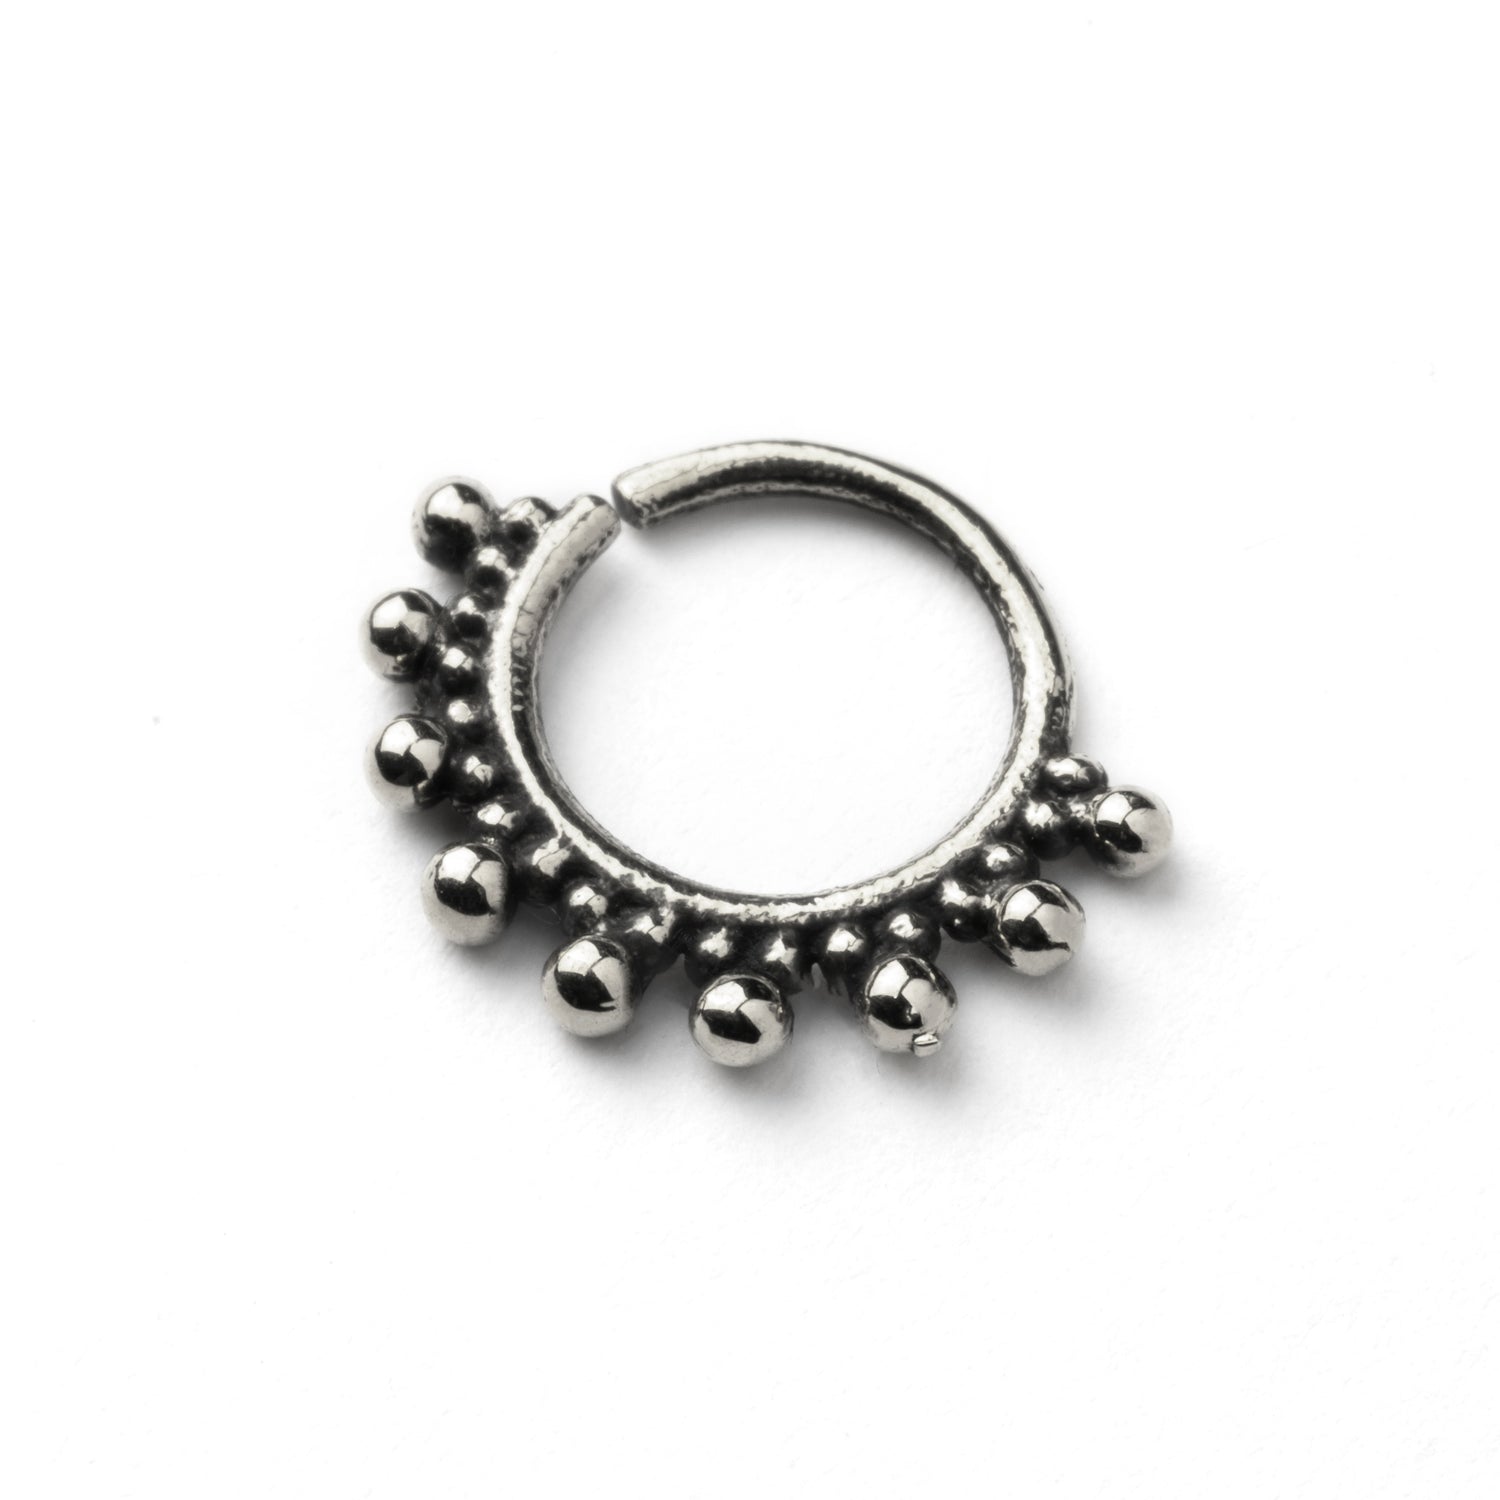 Indira silver septum ring right side view